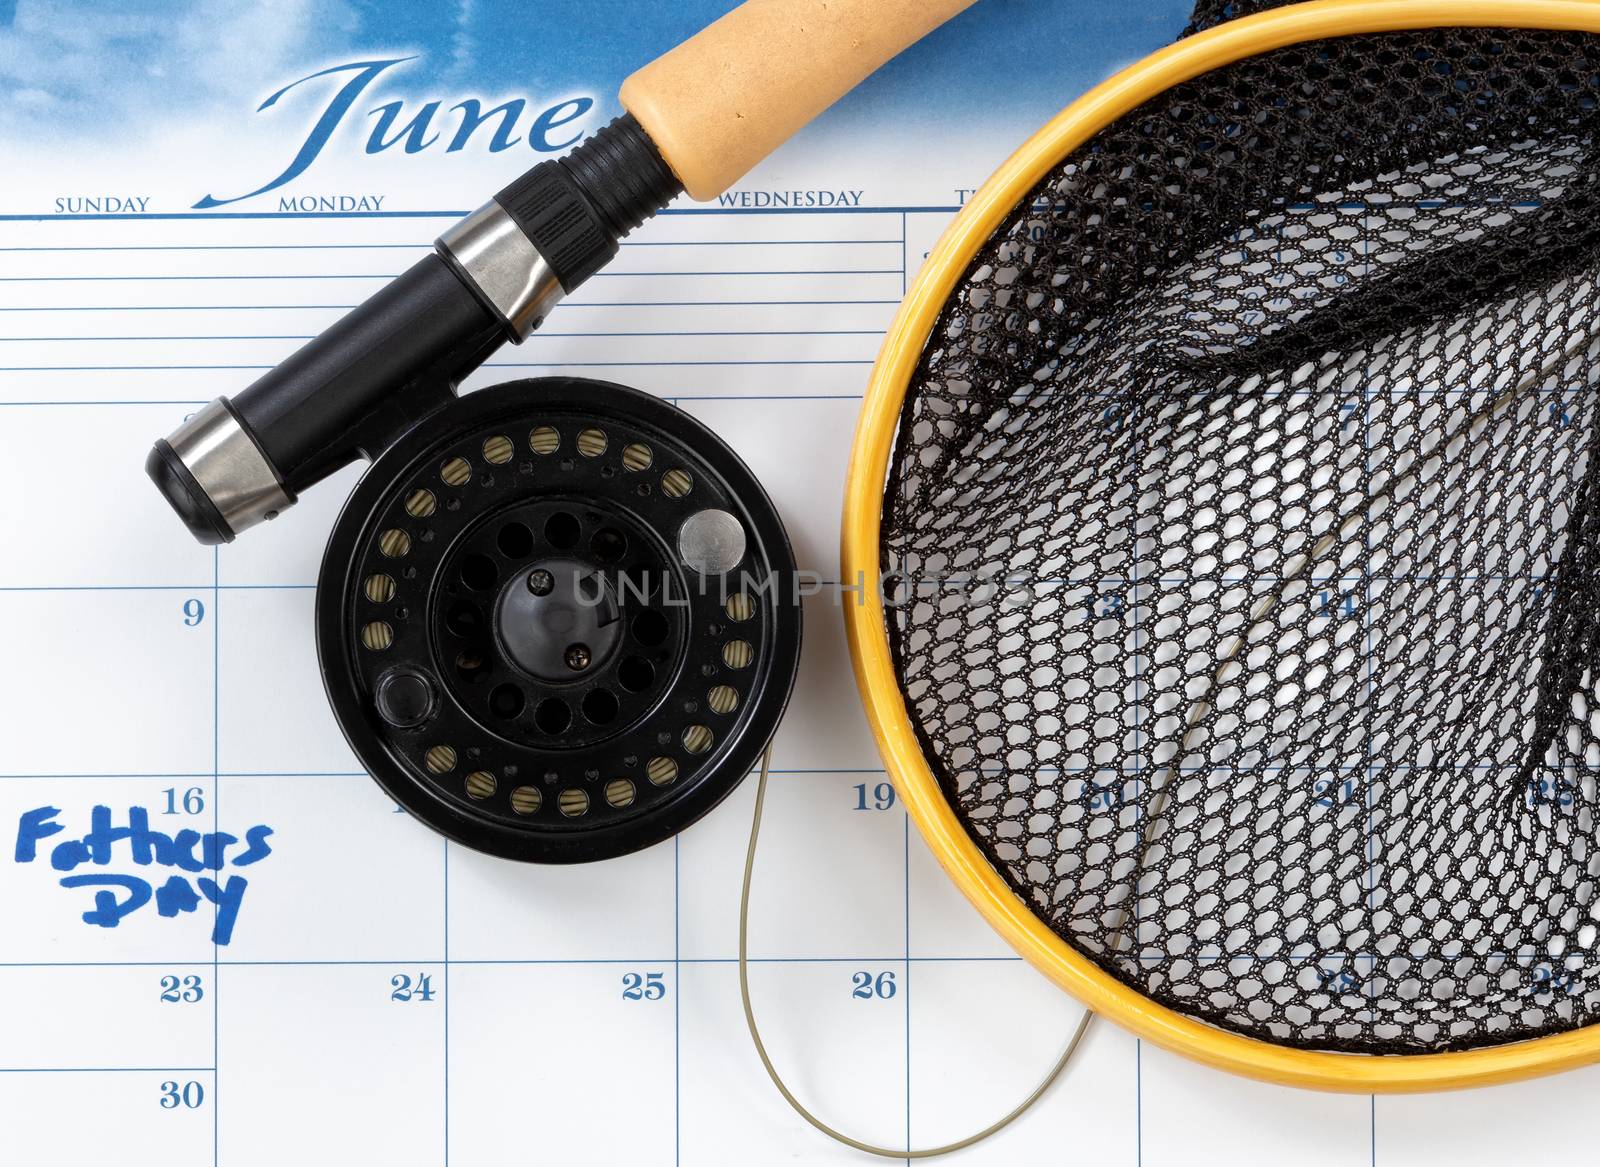 Fathers Day holiday marked on calendar with fishing equipment fo by tab1962